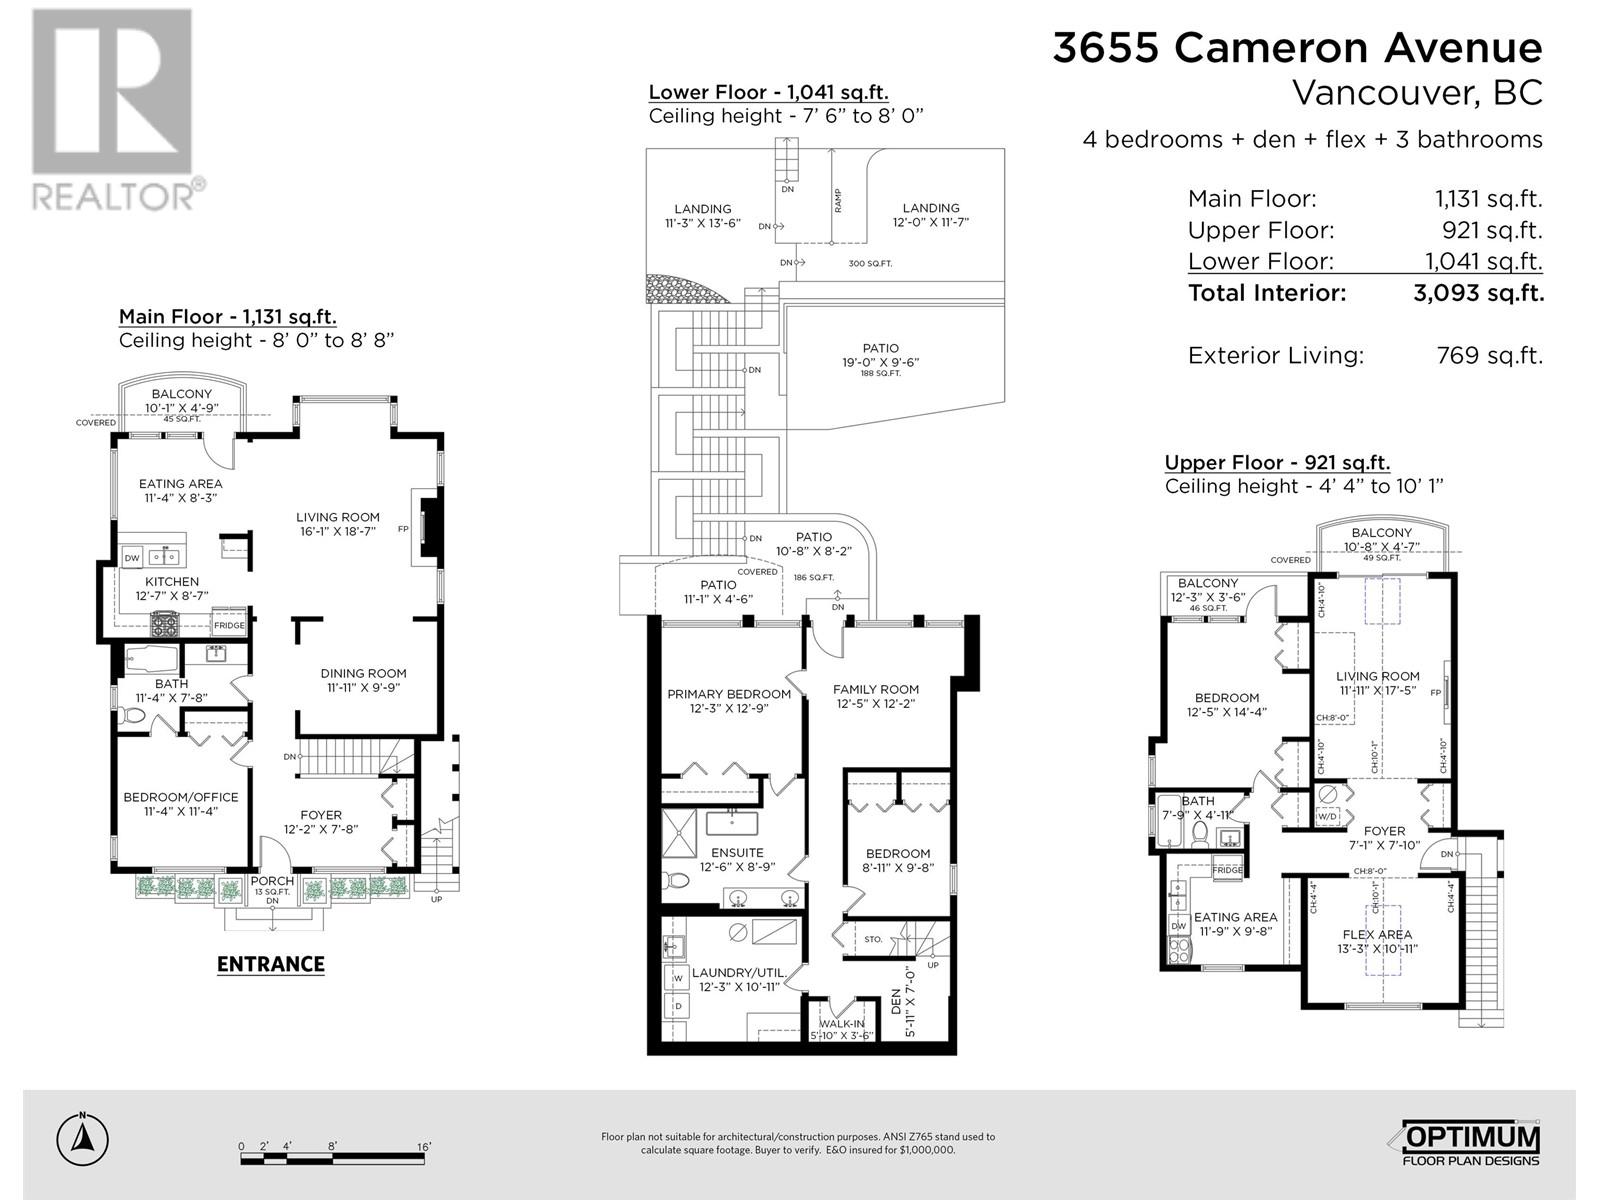 Listing Picture 38 of 38 : 3655 CAMERON AVENUE, Vancouver / 溫哥華 - 魯藝地產 Yvonne Lu Group - MLS Medallion Club Member